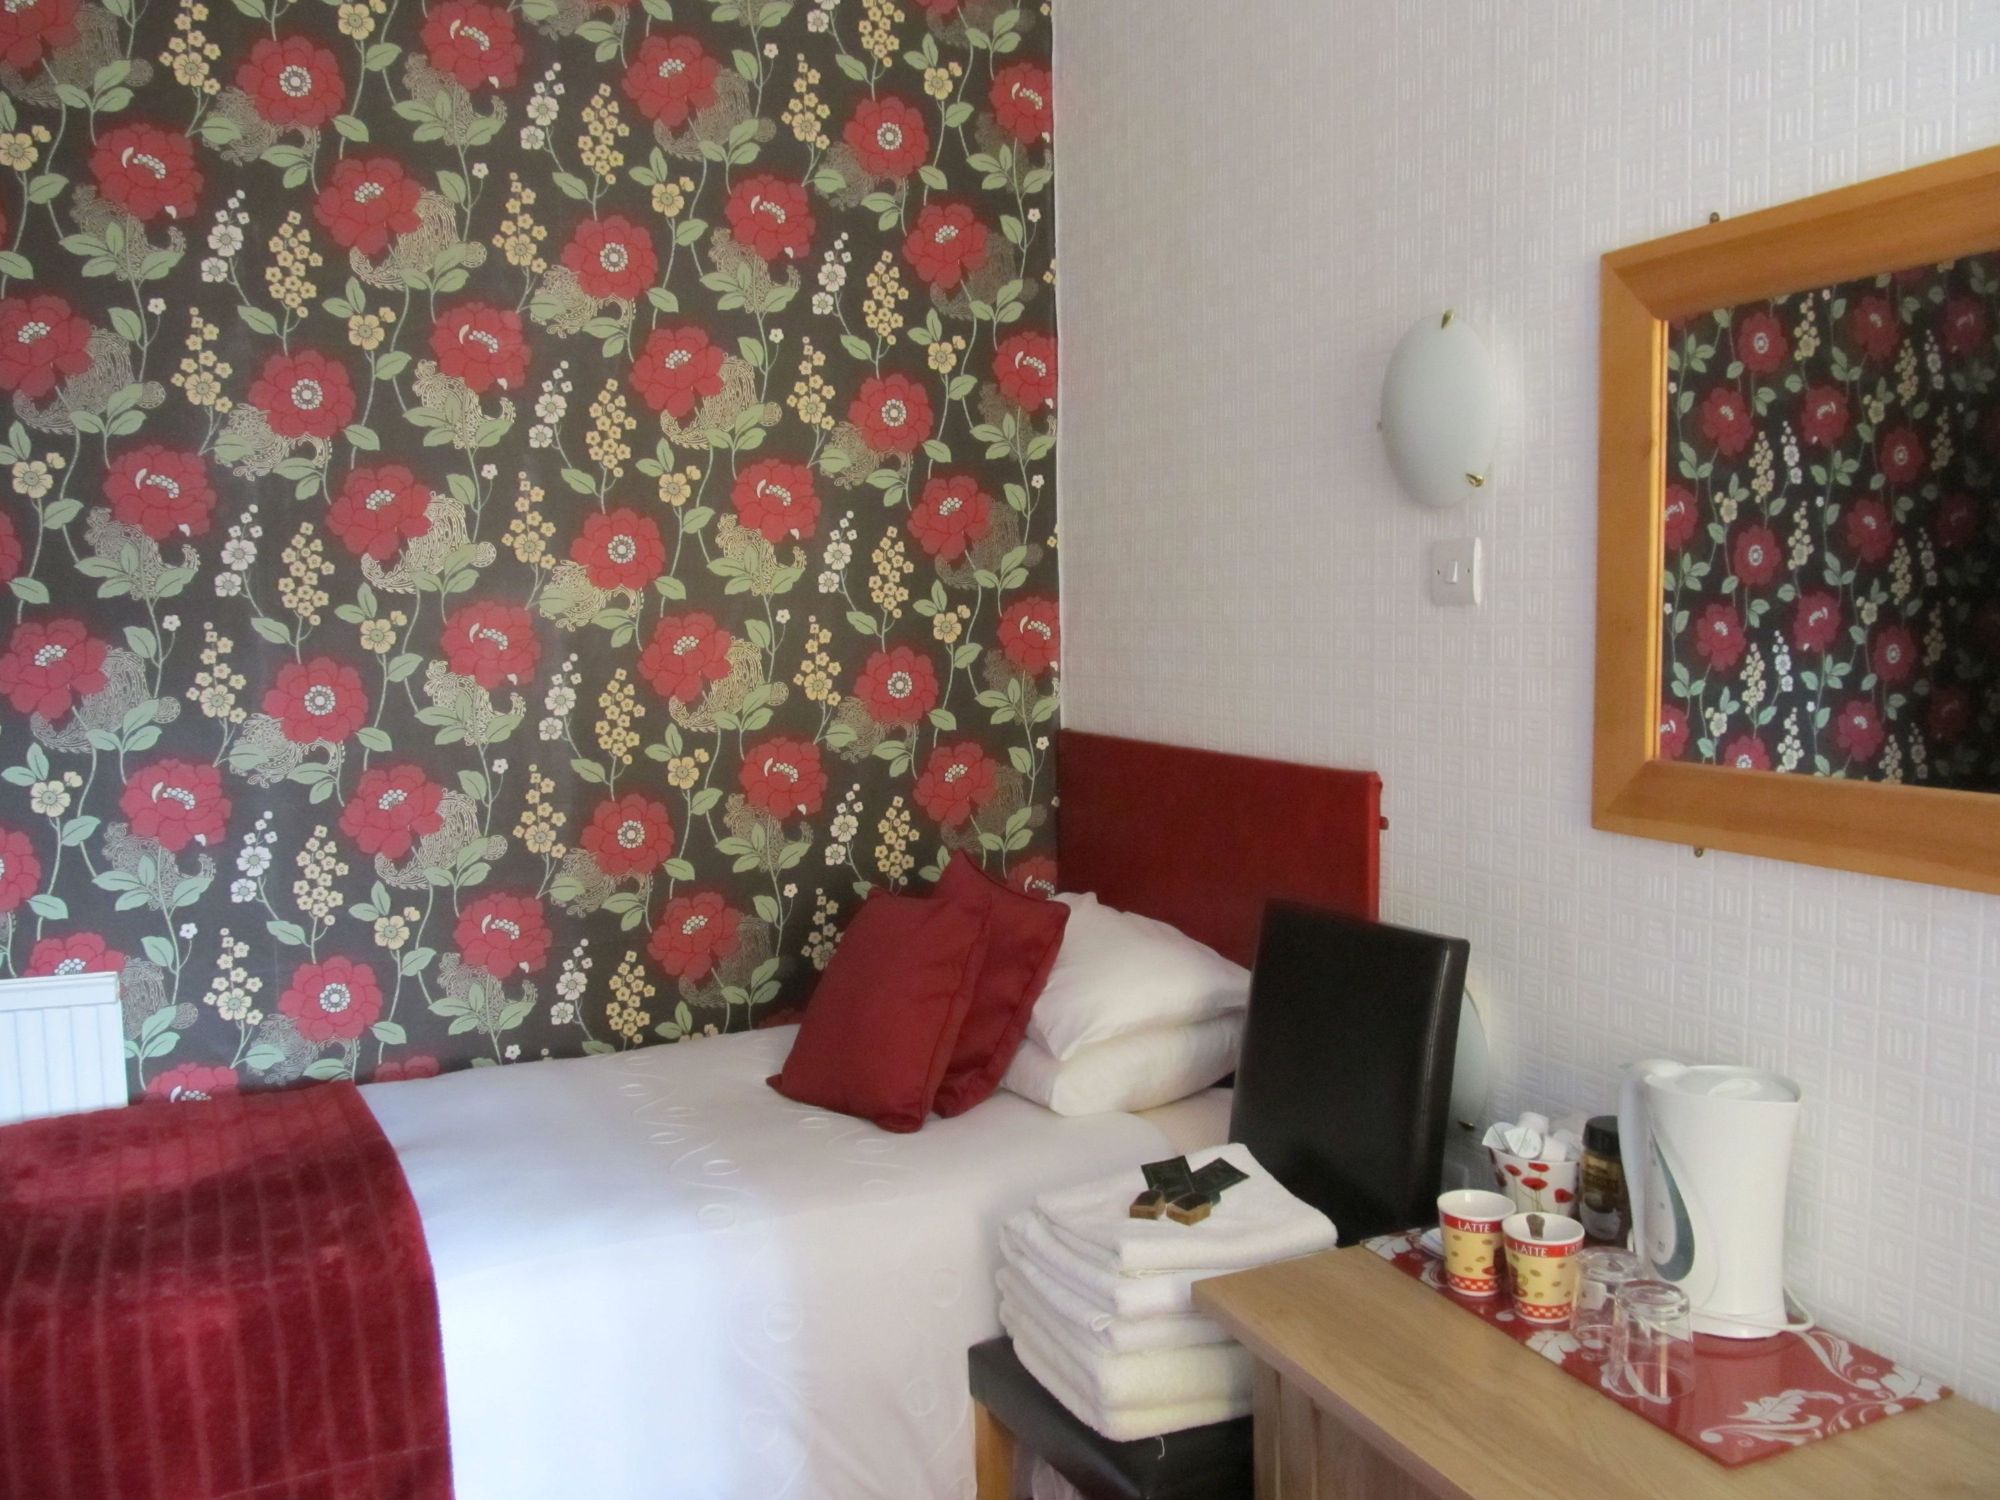 B&Bs in Blackpool holidays at Cool Places